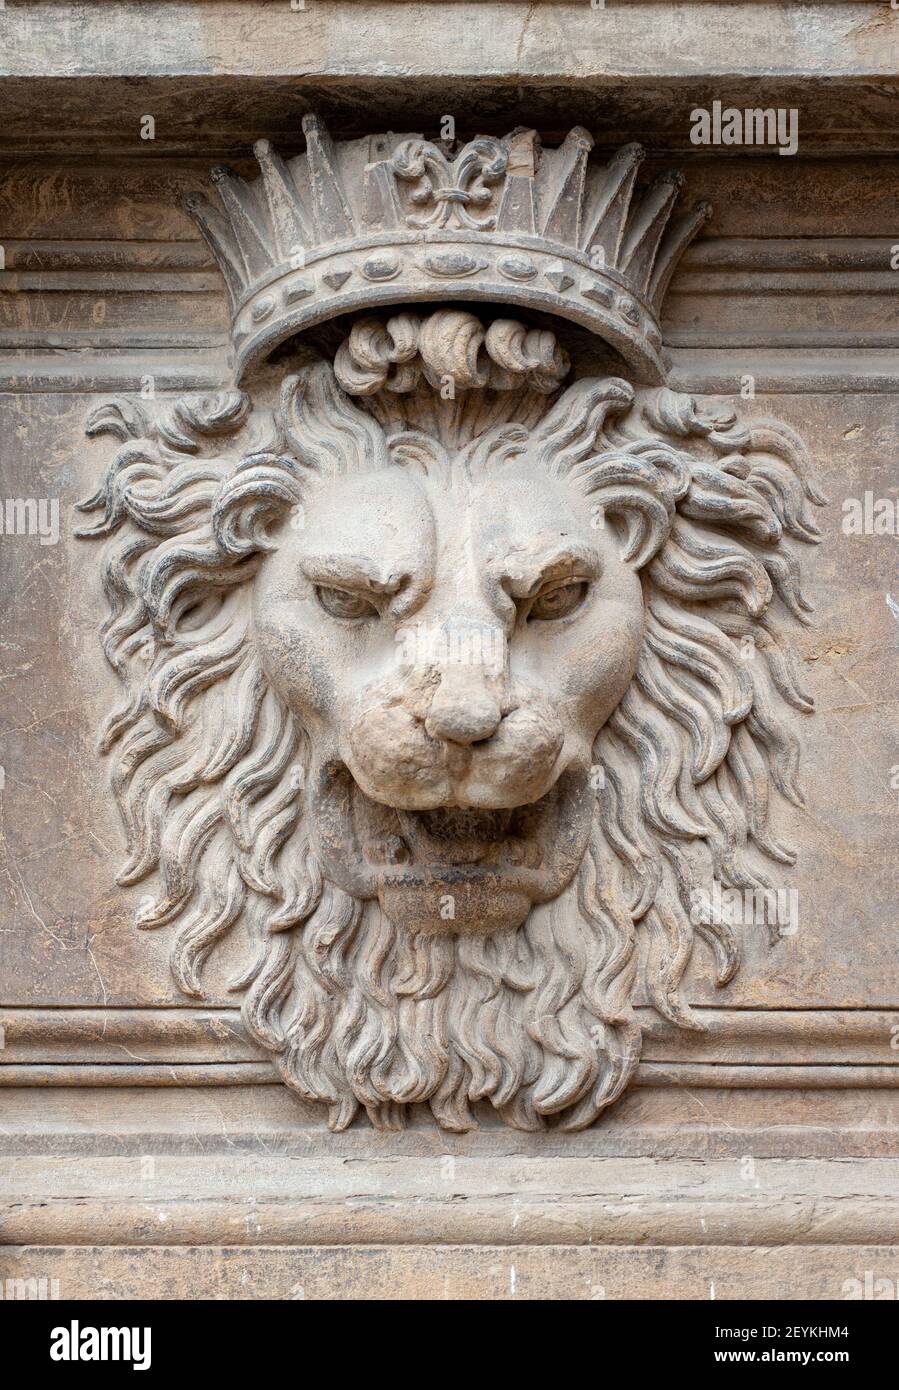 Florence, Italy - 2021, February 19: Lion's head stonework detail, on the facade of Palazzo Pitti. Stock Photo